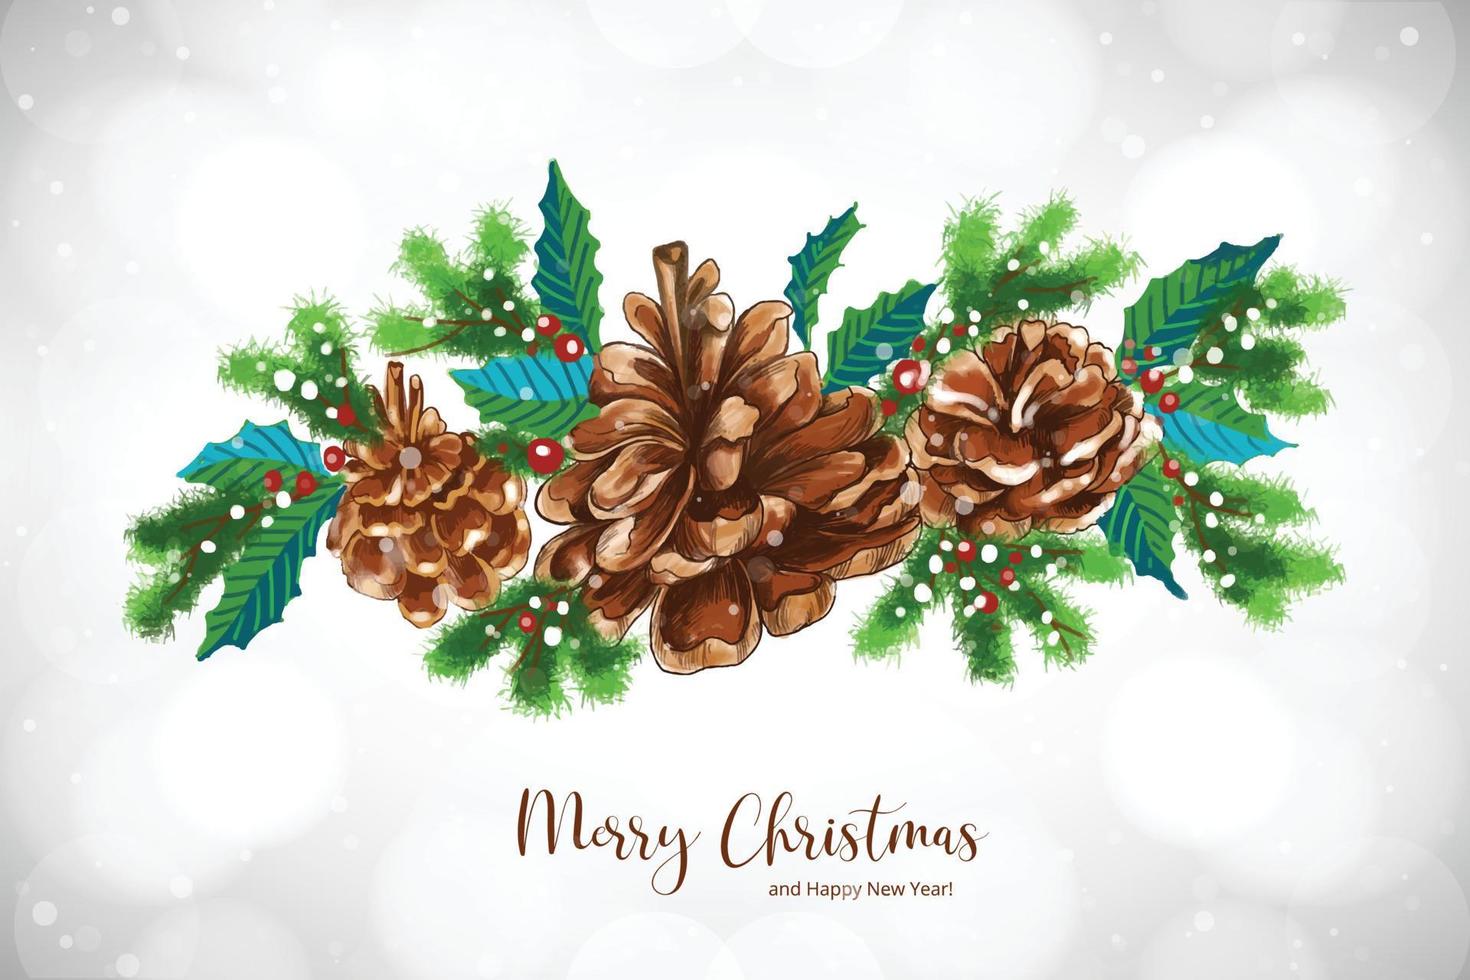 Christmas holly pine cone set merry christmas card background vector